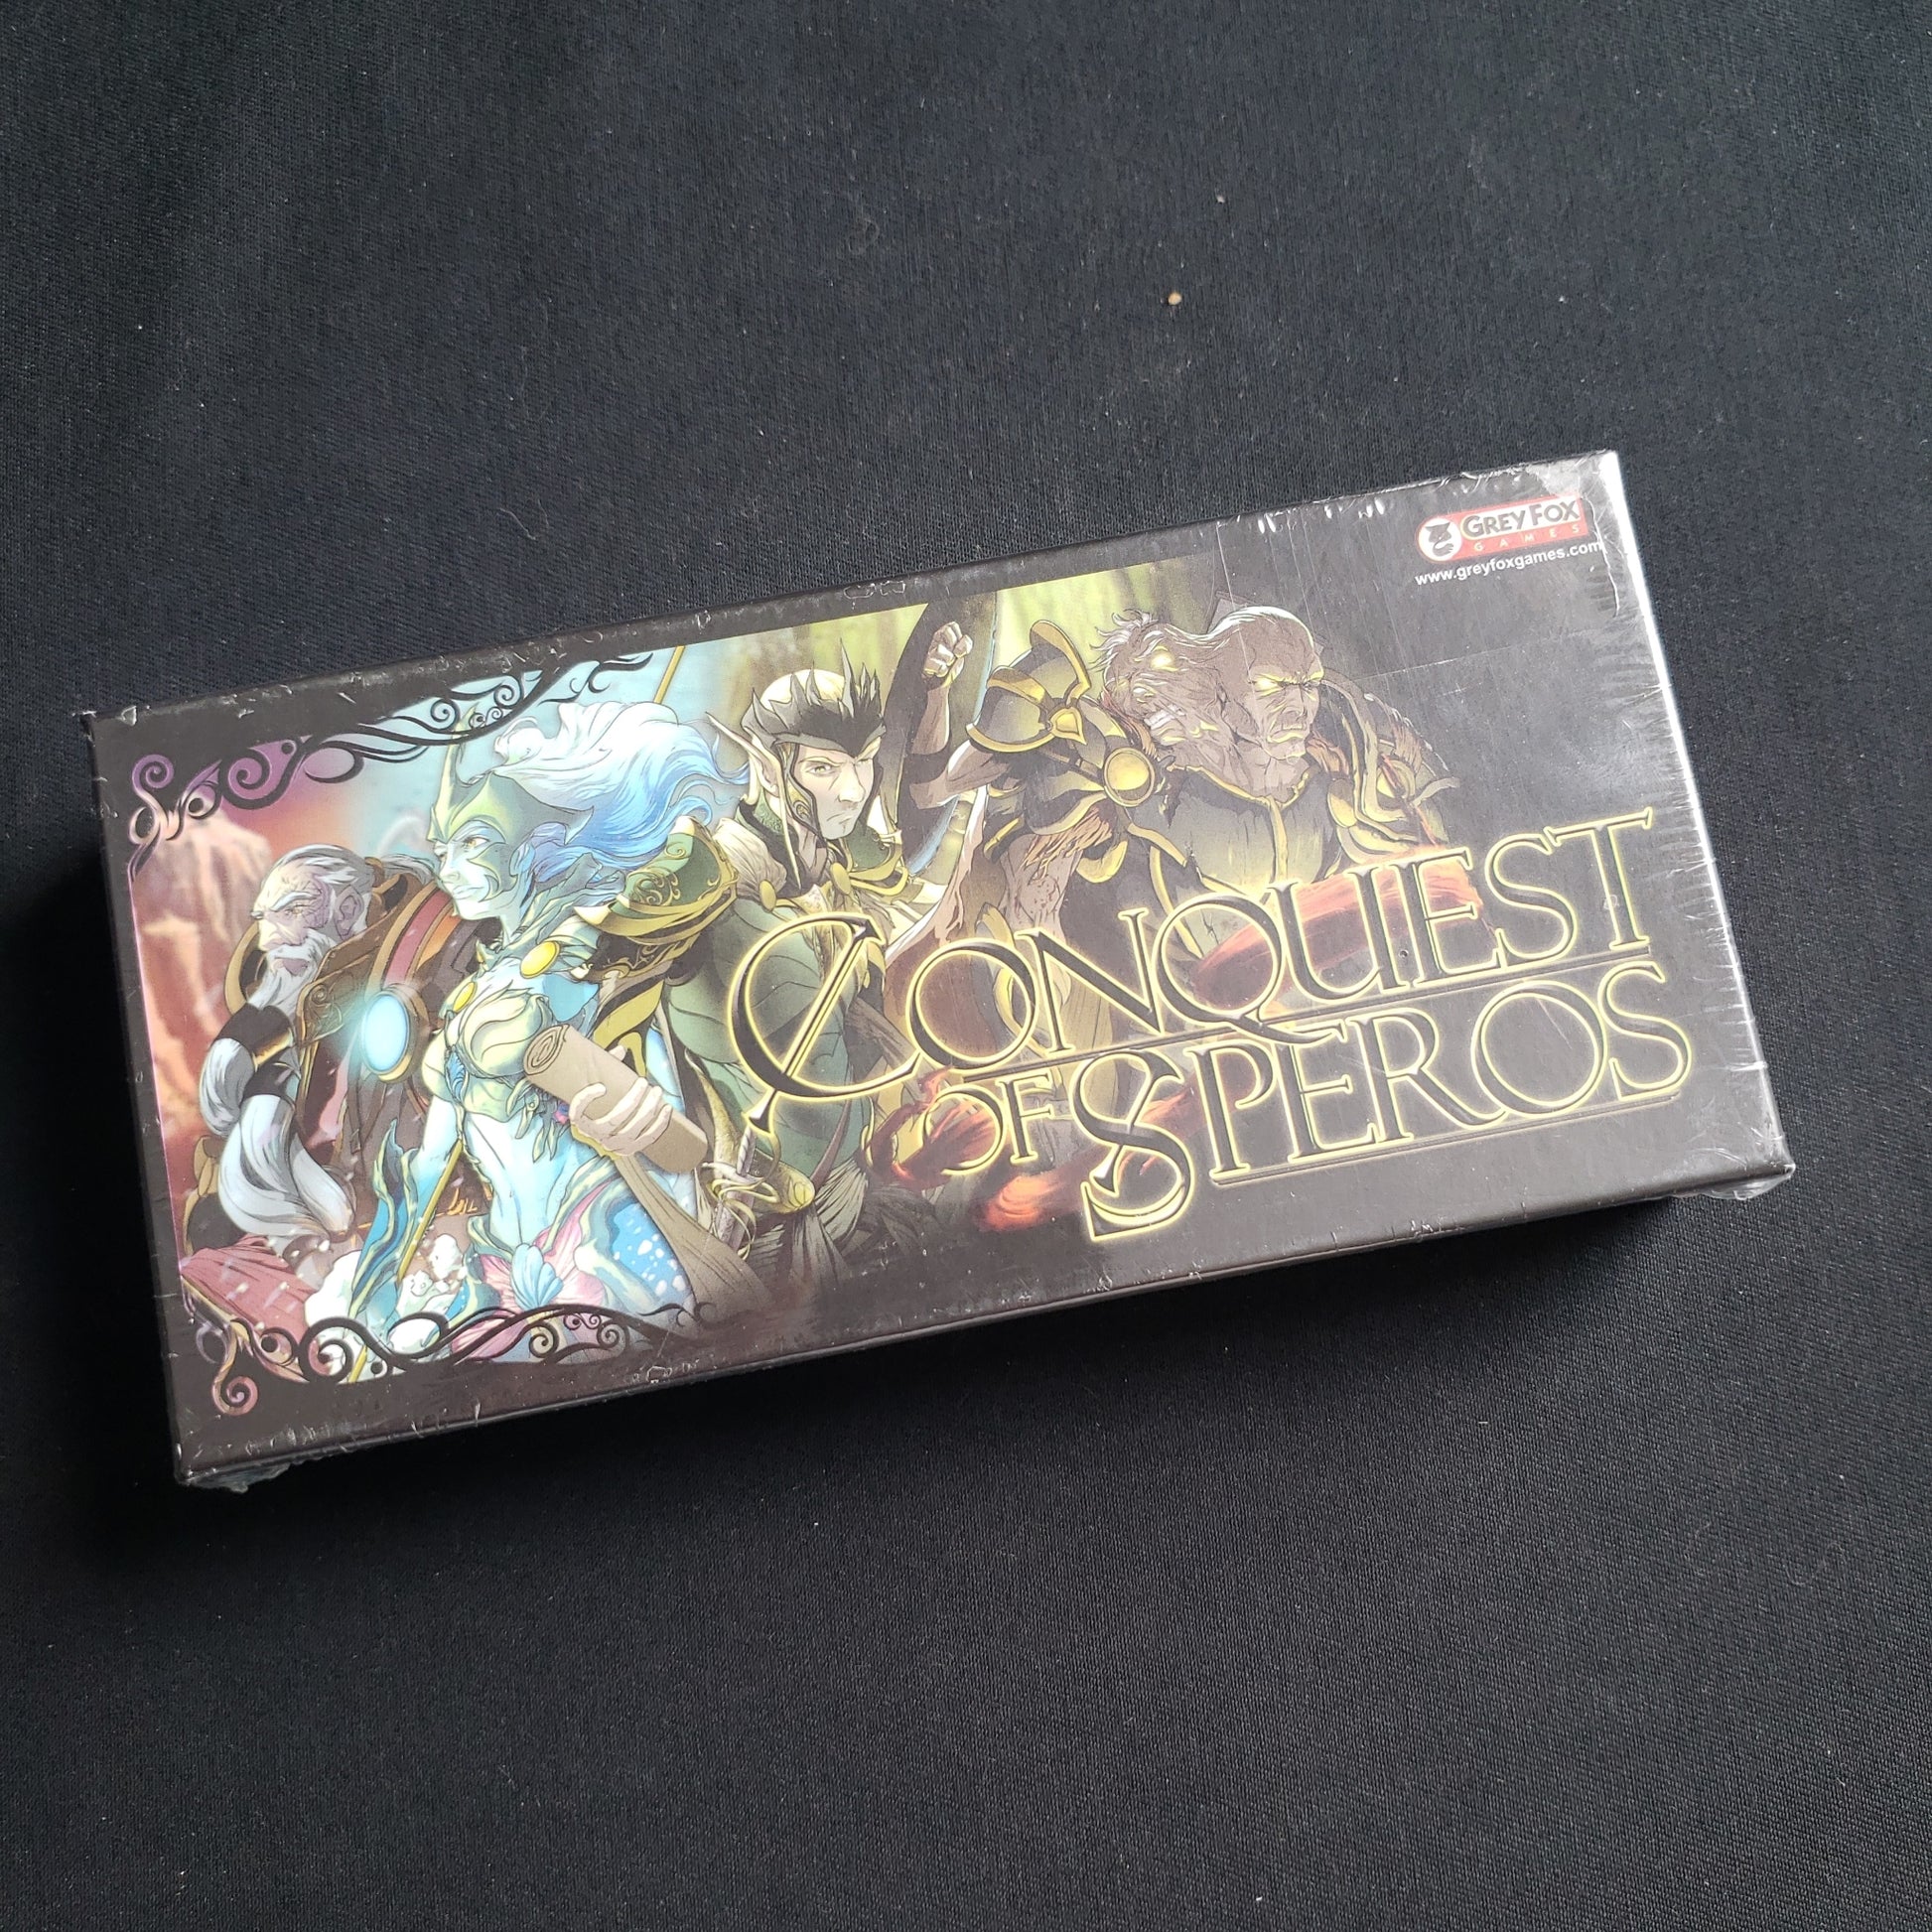 Image shows the front cover of the box of the Conquest Of Speros board game